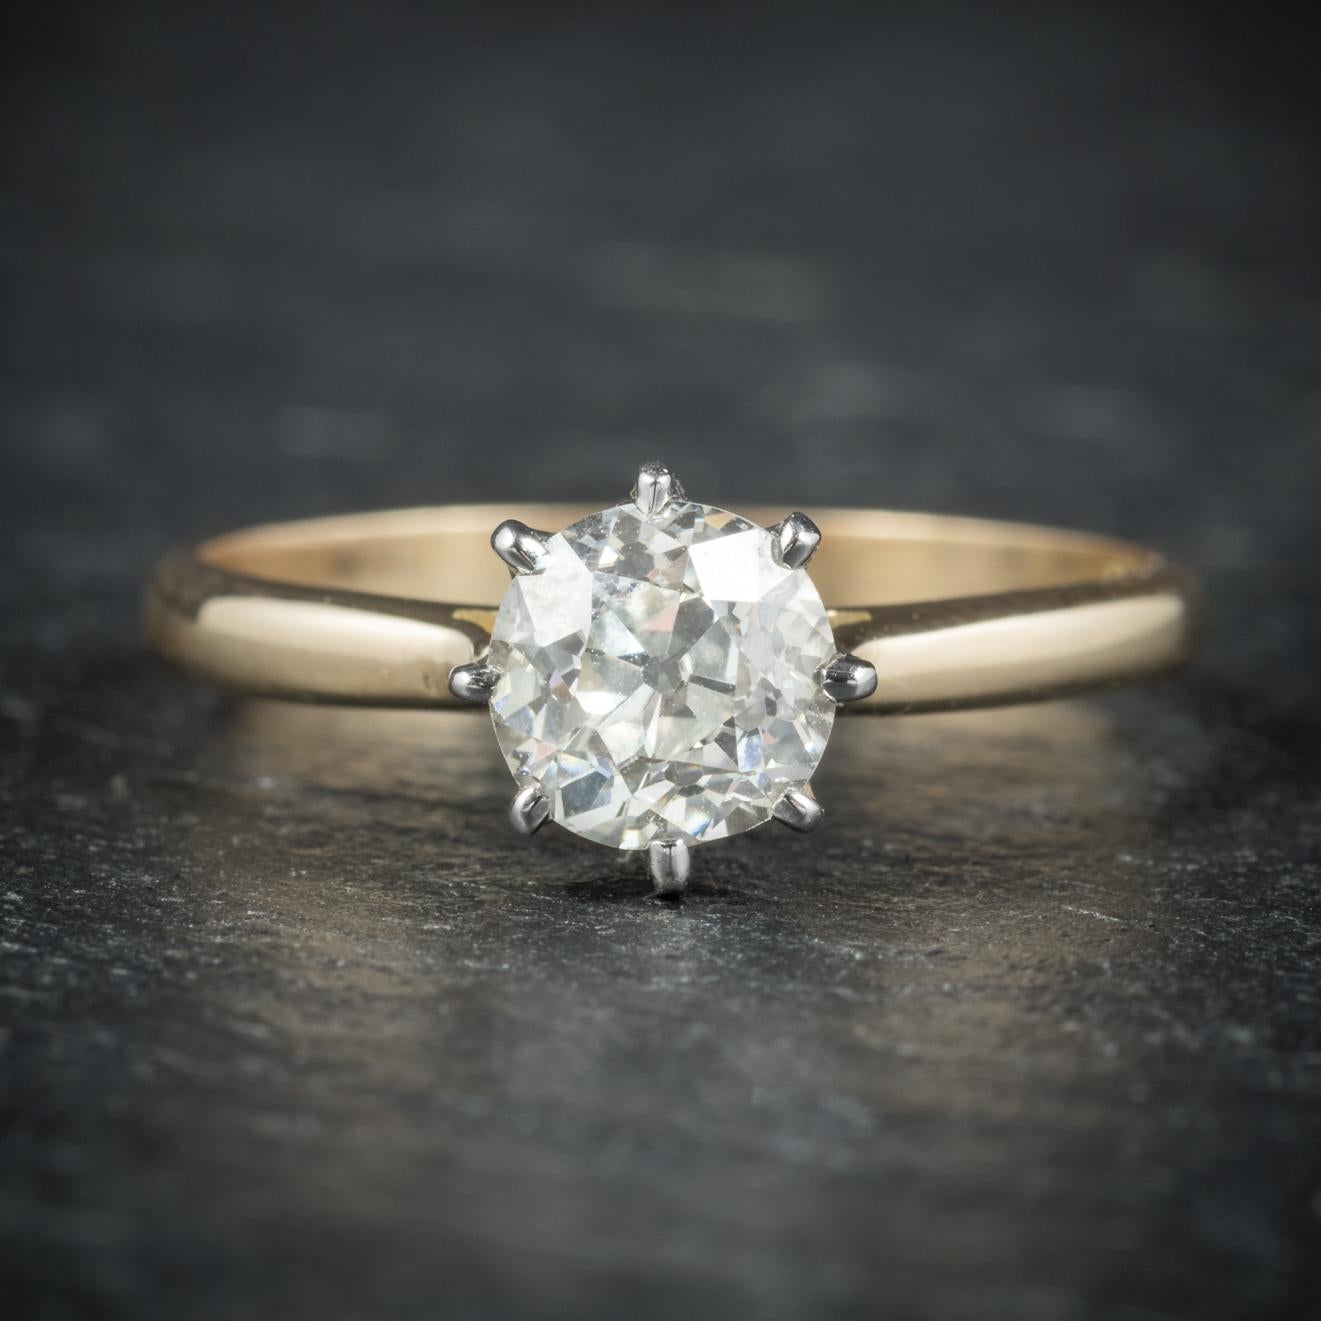 A magnificent antique Diamond Solitaire ring from the Victorian era, Circa 1900

Adorned with a stunning 1.07ct old cut Diamond which is VS2 clarity and I colour

The stone is set in Platinum and fitted to an elegant 18ct Yellow Gold shank which is